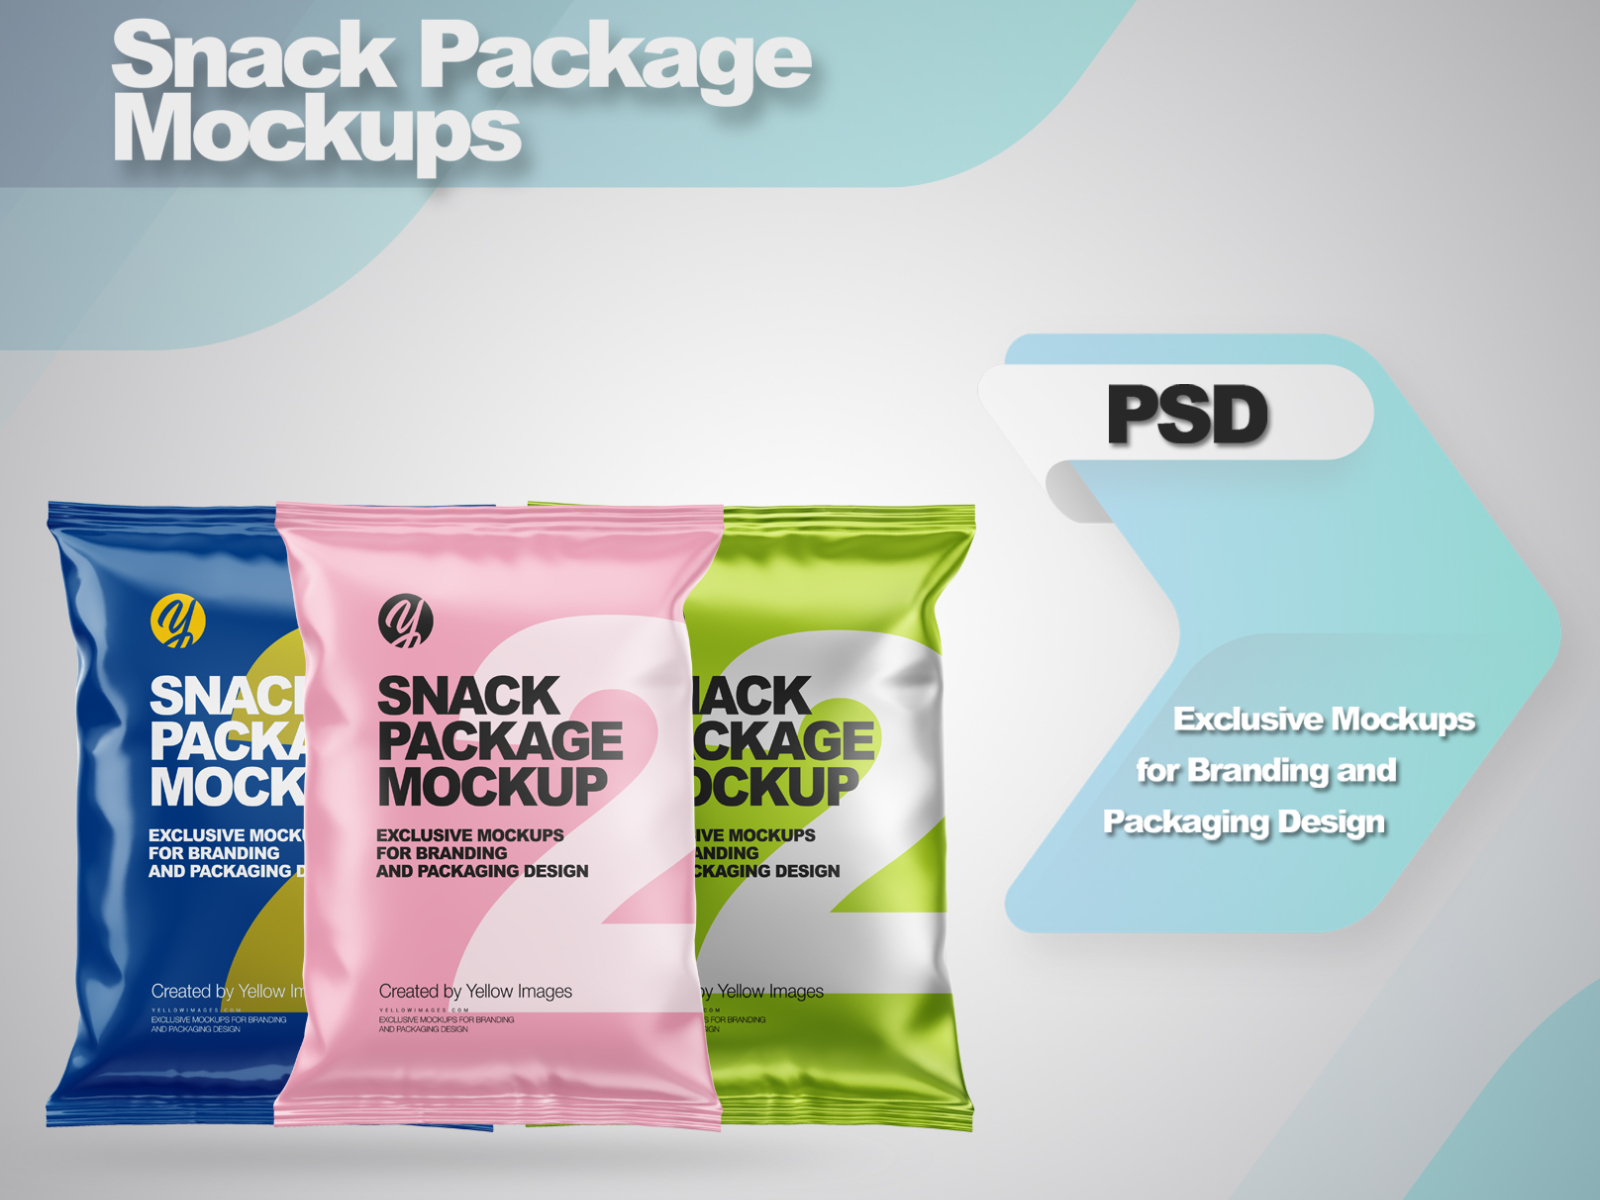 Download Snack Packaging Mockup Psd Download Free And Premium Psd Mockup Templates And Design Assets